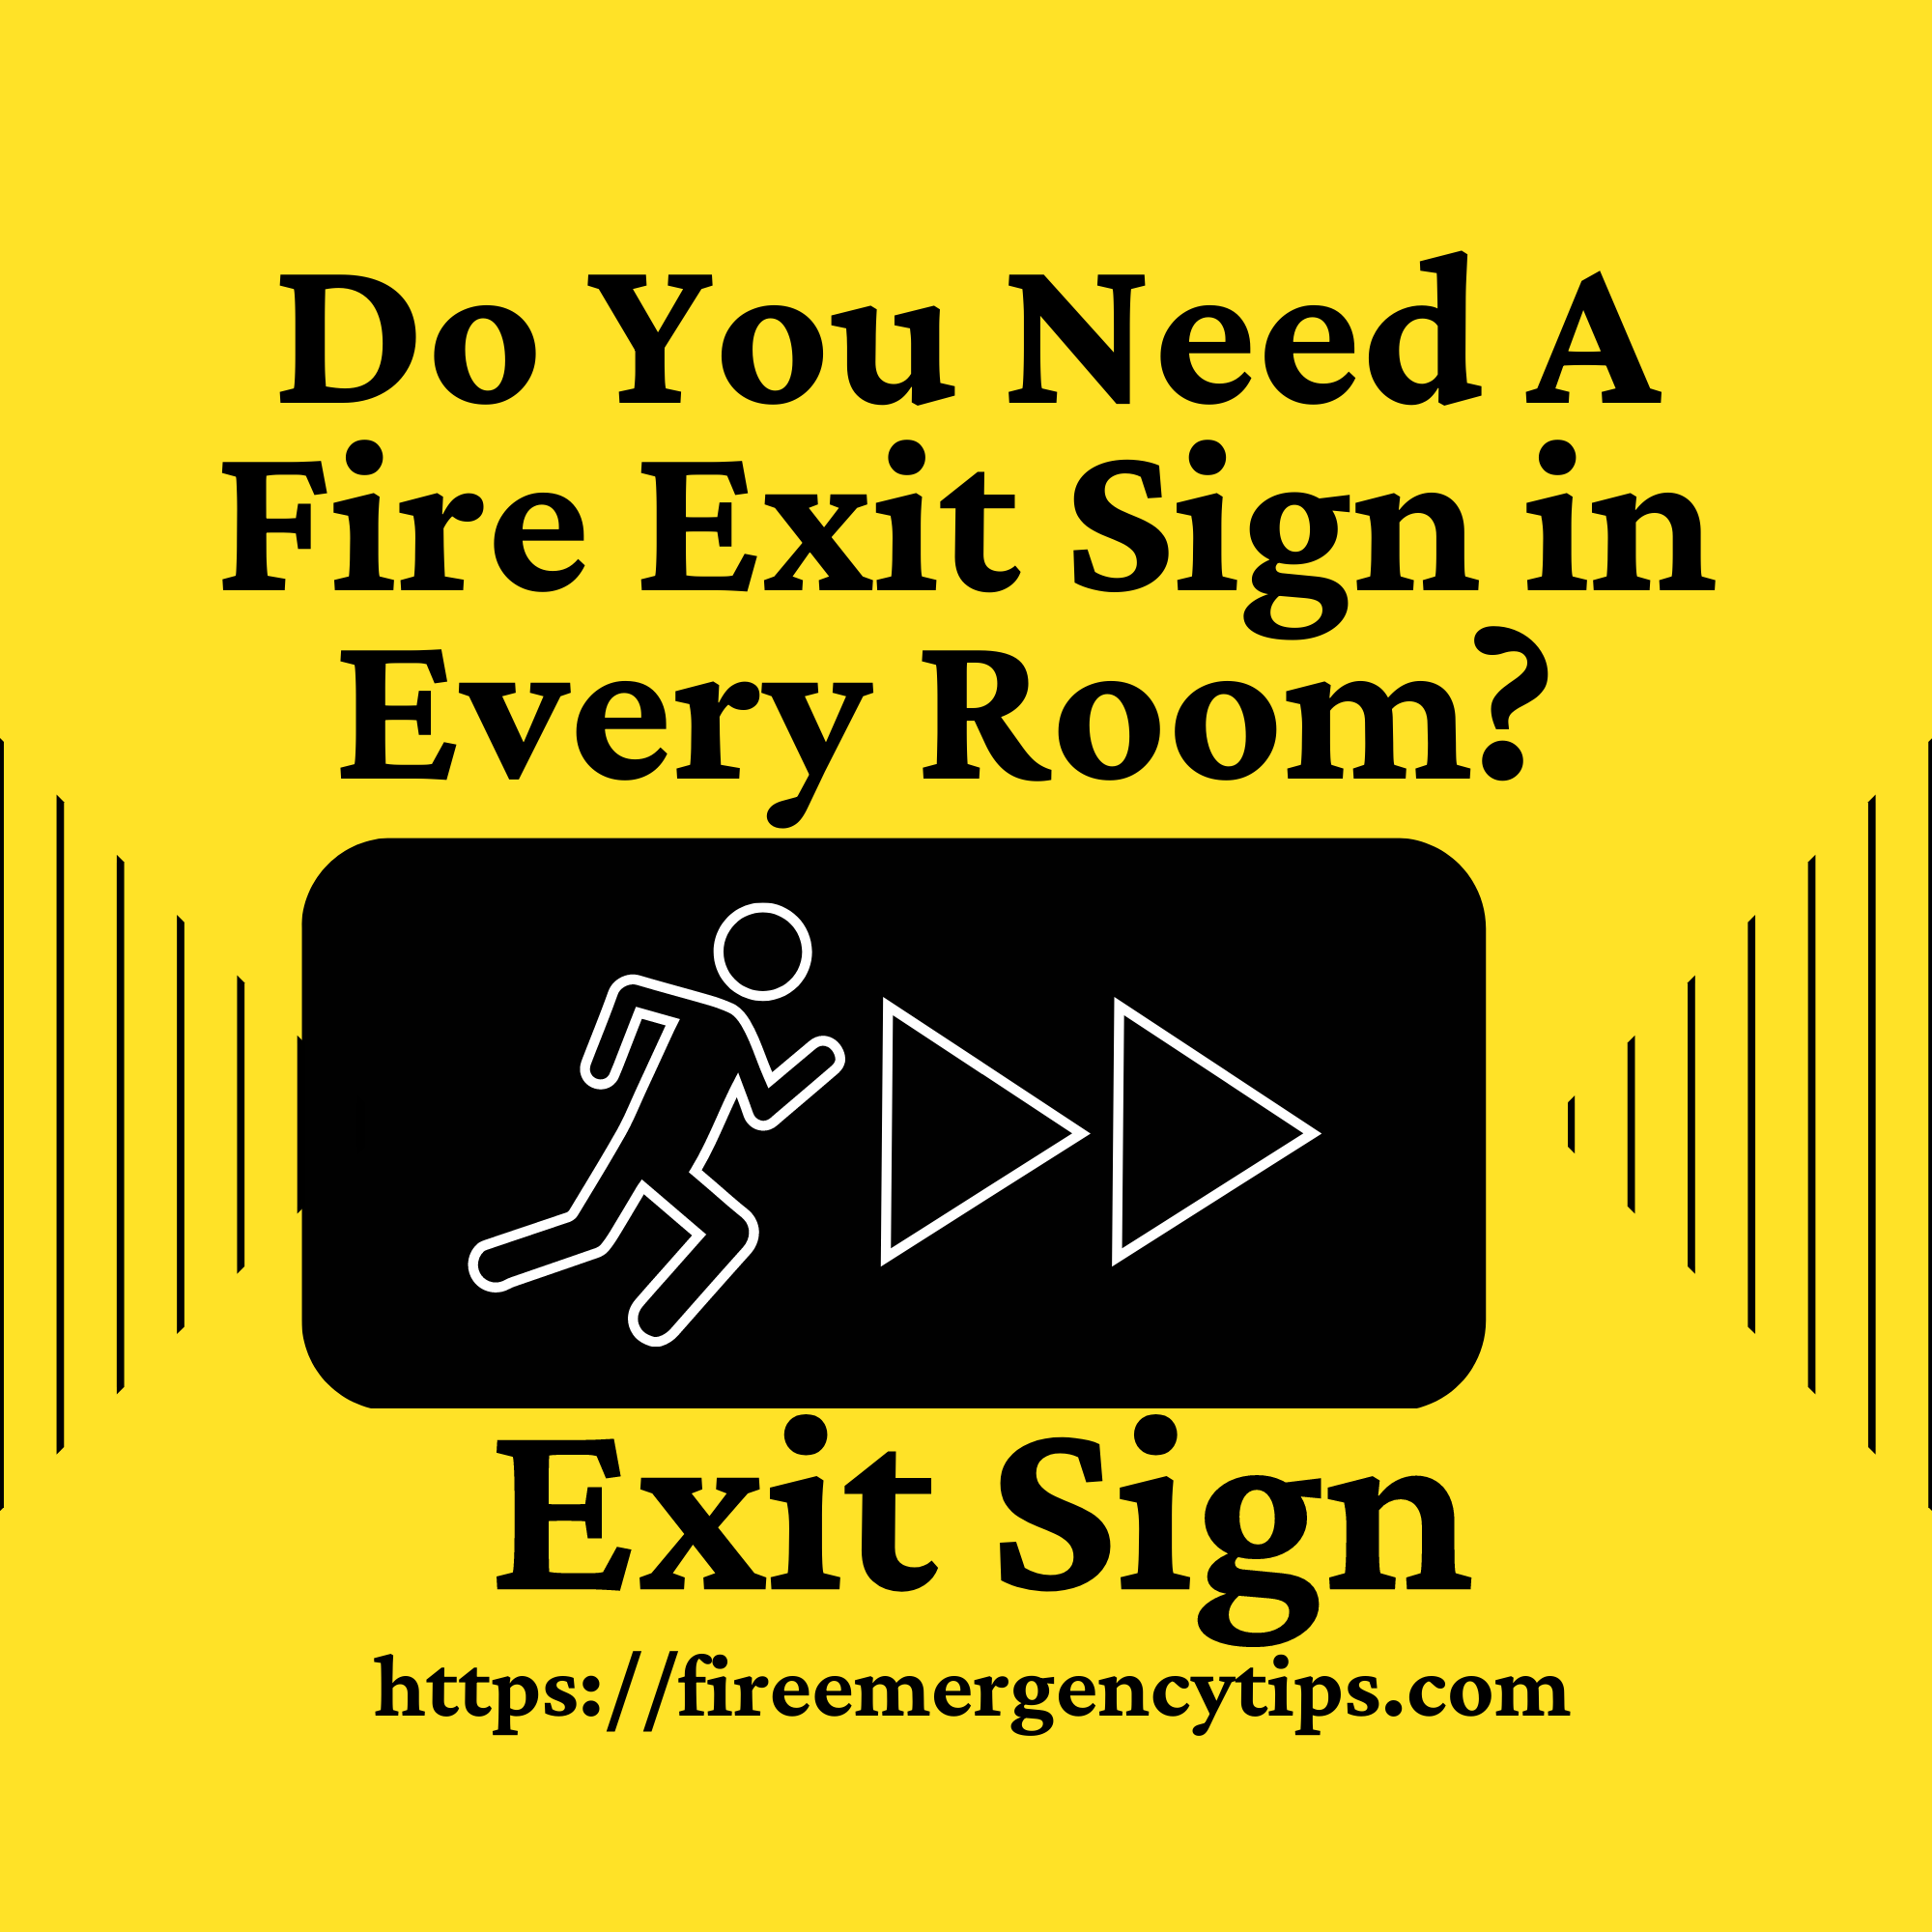 Do You Need A Fire Exit Sign in Every Room?